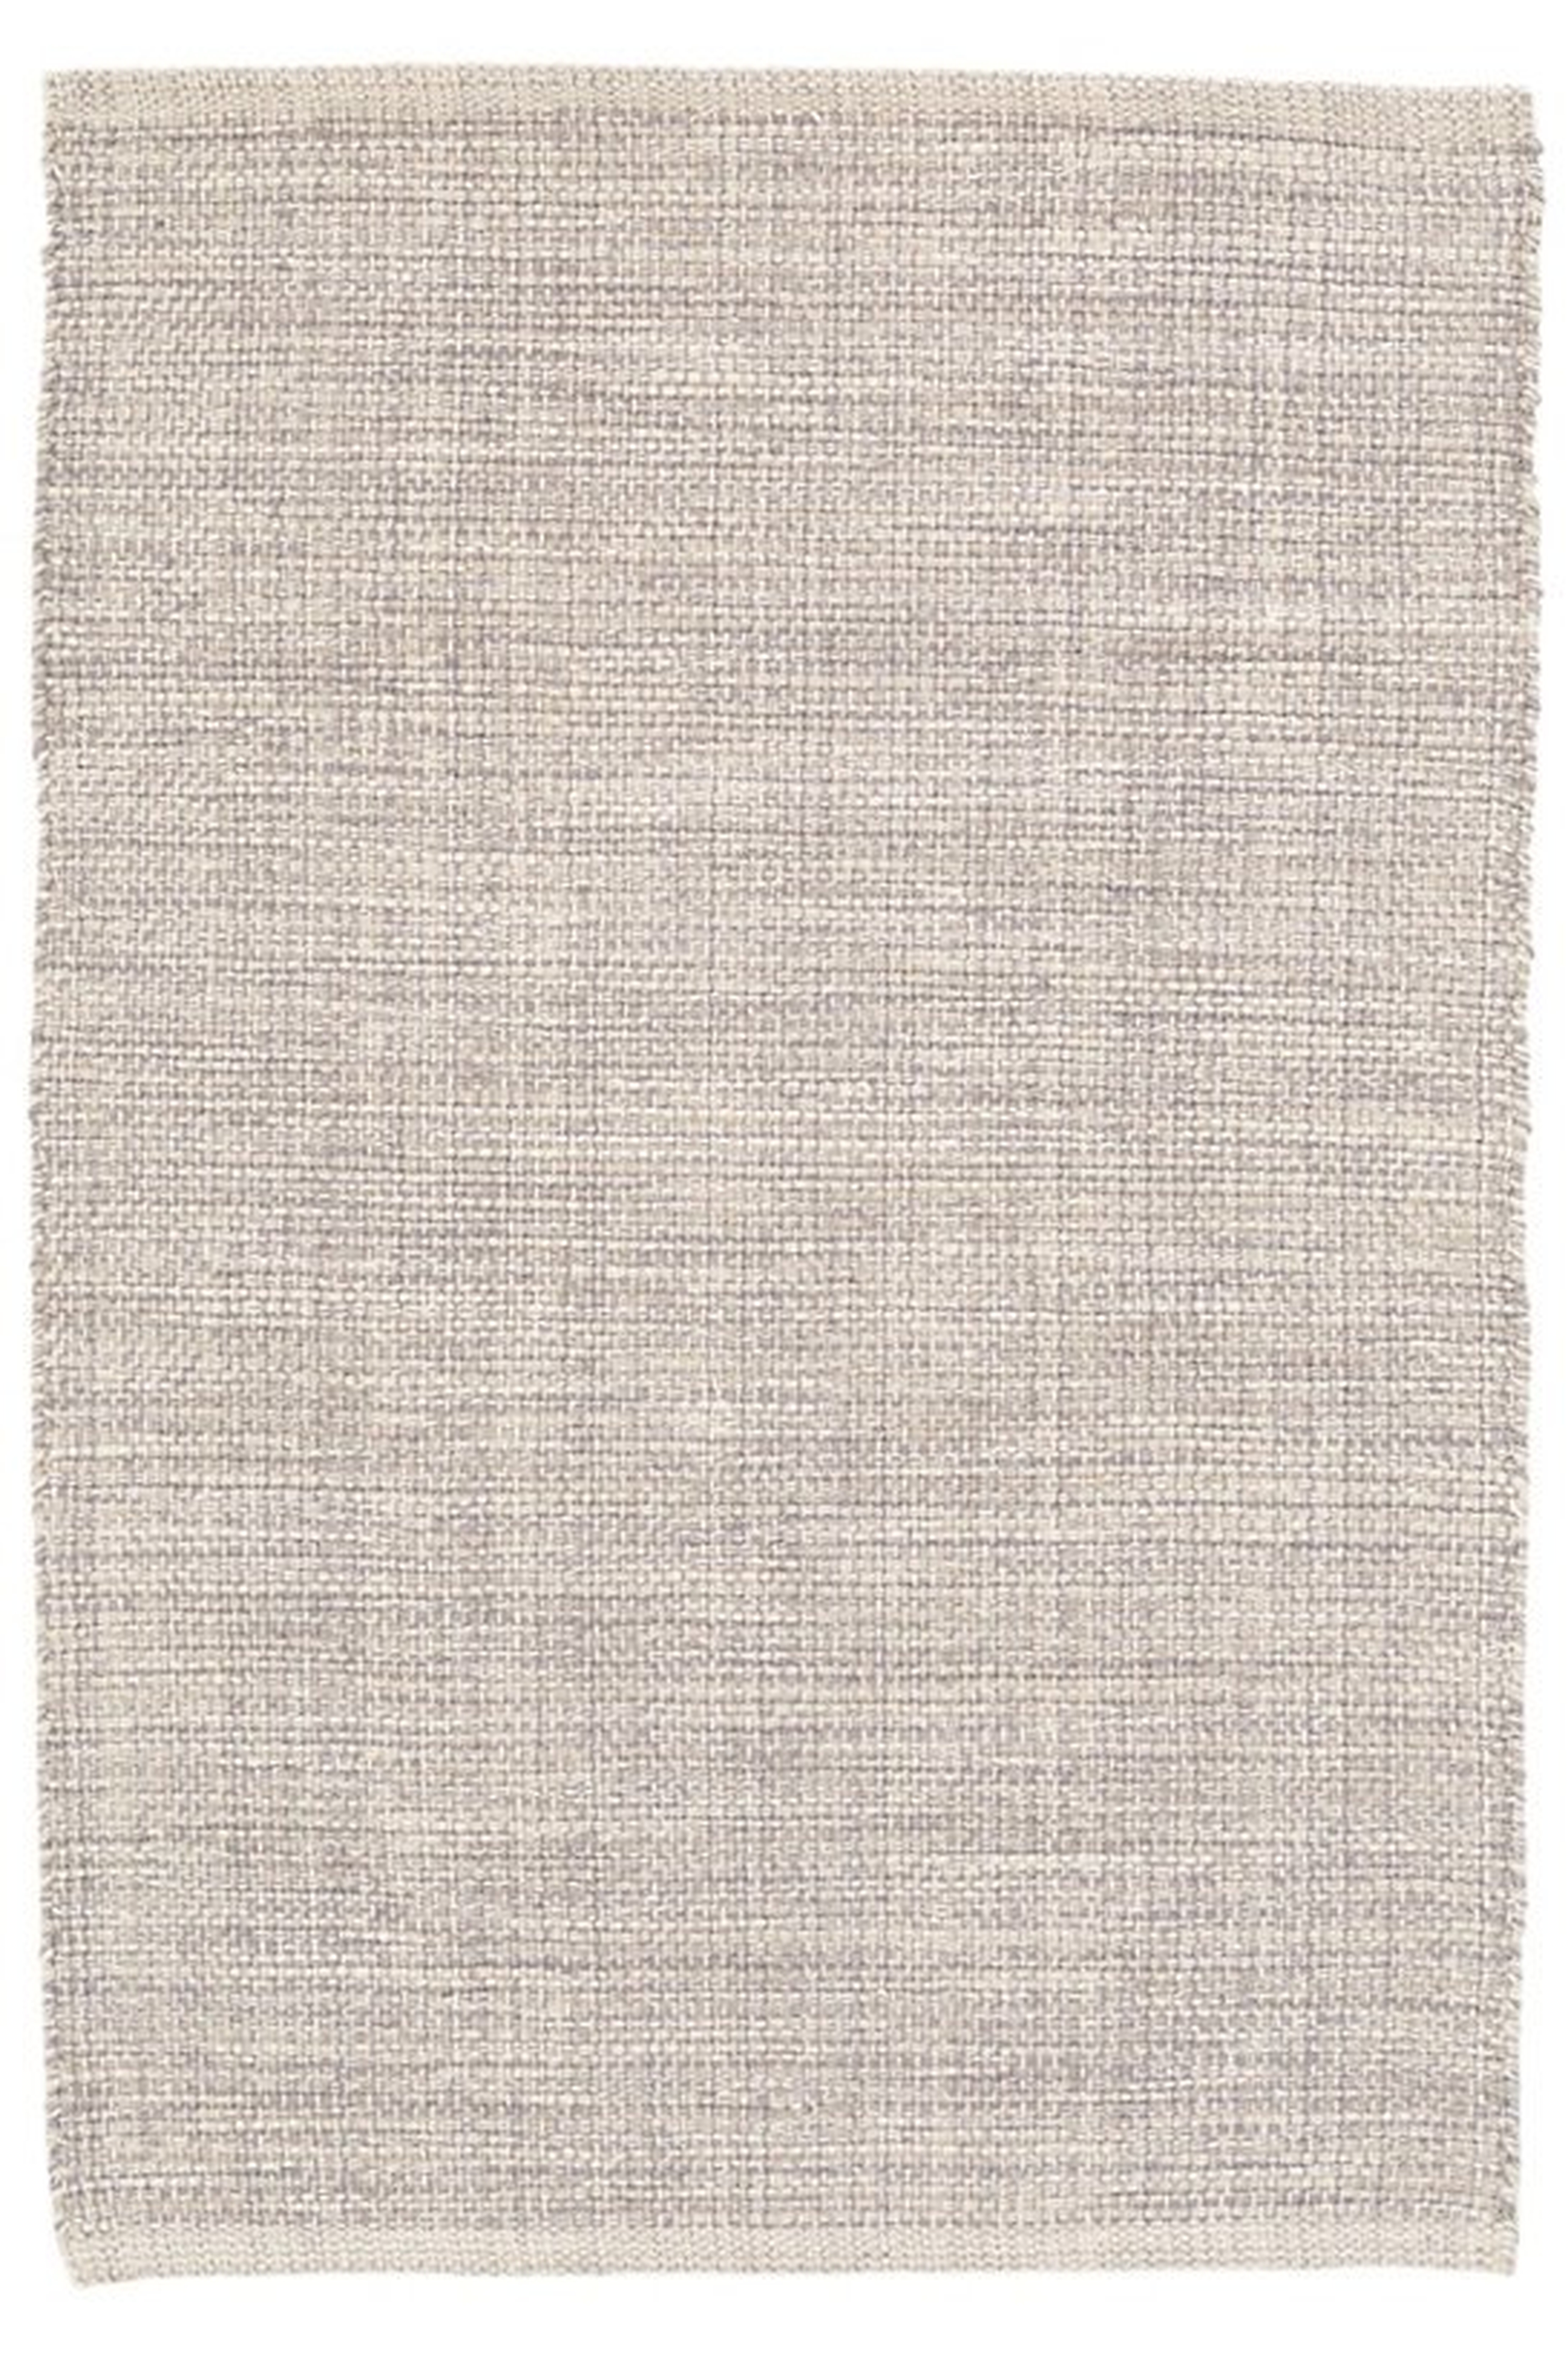 MARLED GREY WOVEN COTTON RUG - 10 x 14' - Dash and Albert